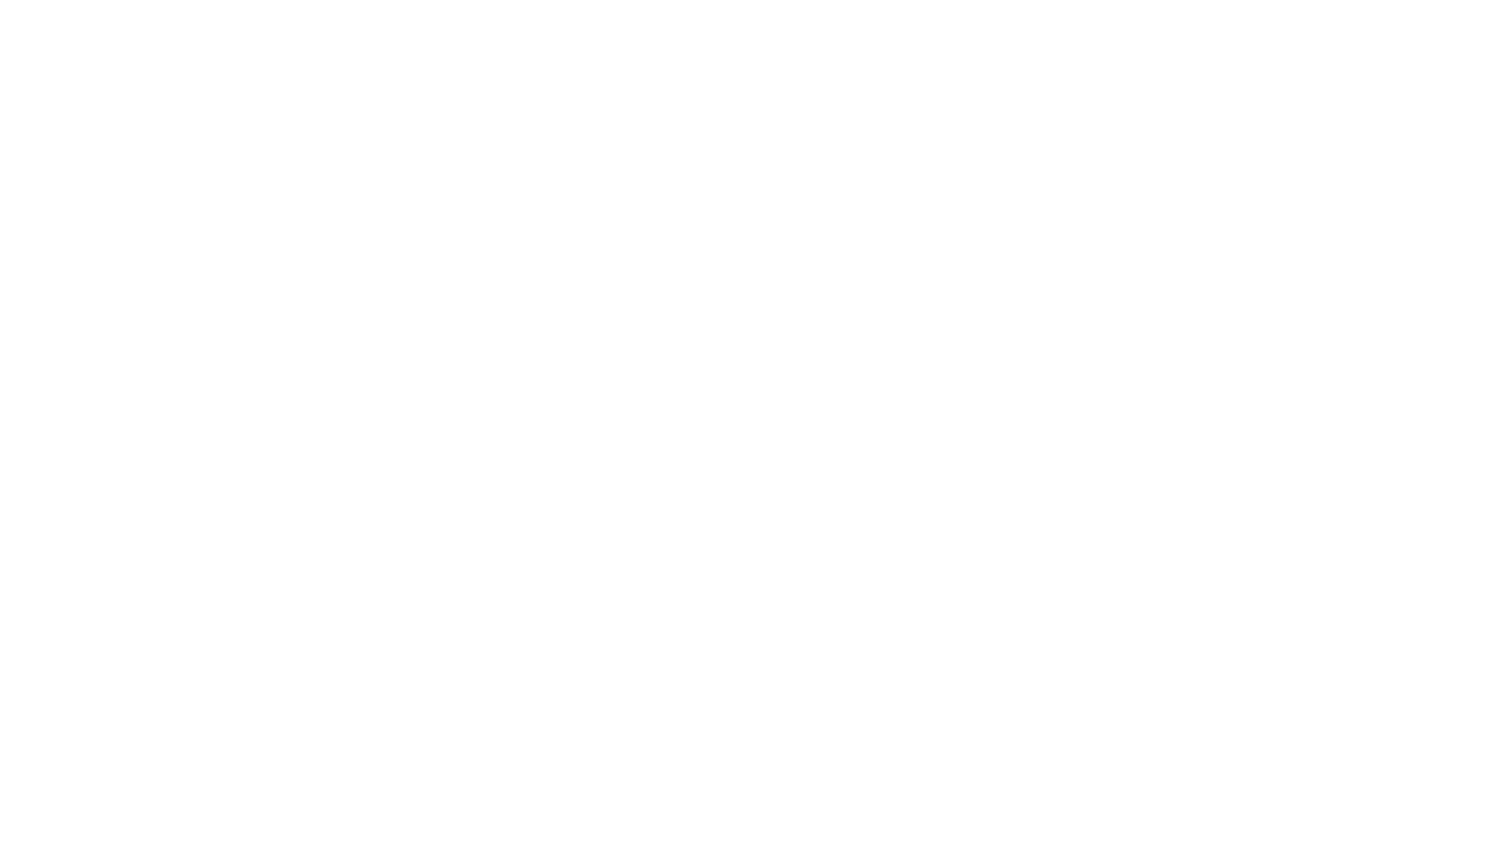 The Benefit Consultants